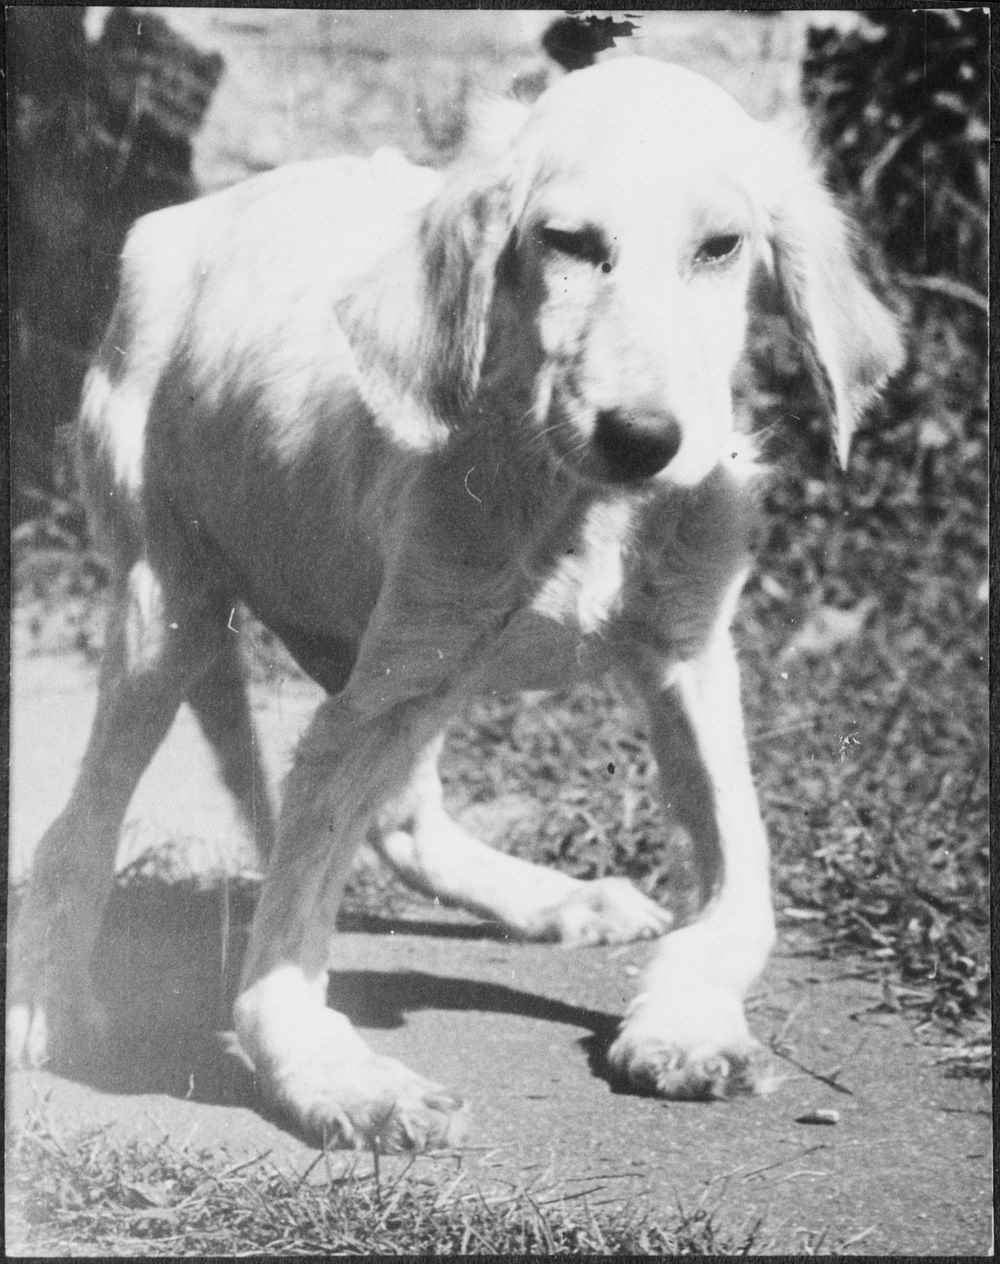 Dog with rickets. U.S. National Agricultural Research Center. Sourced from the Library of Congress.